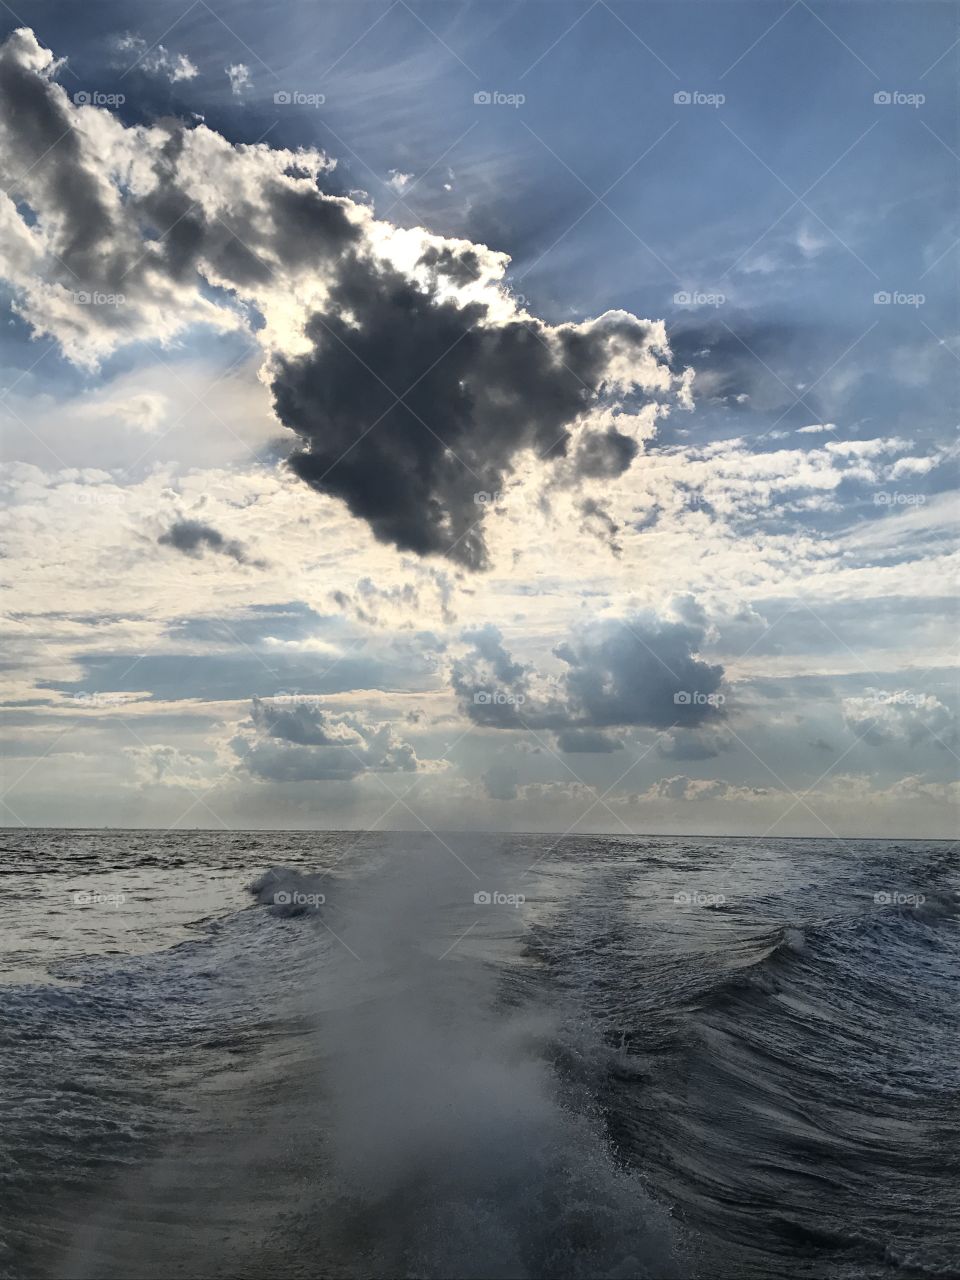 The breathtaking view from my boat along the Atlantic Ocean  